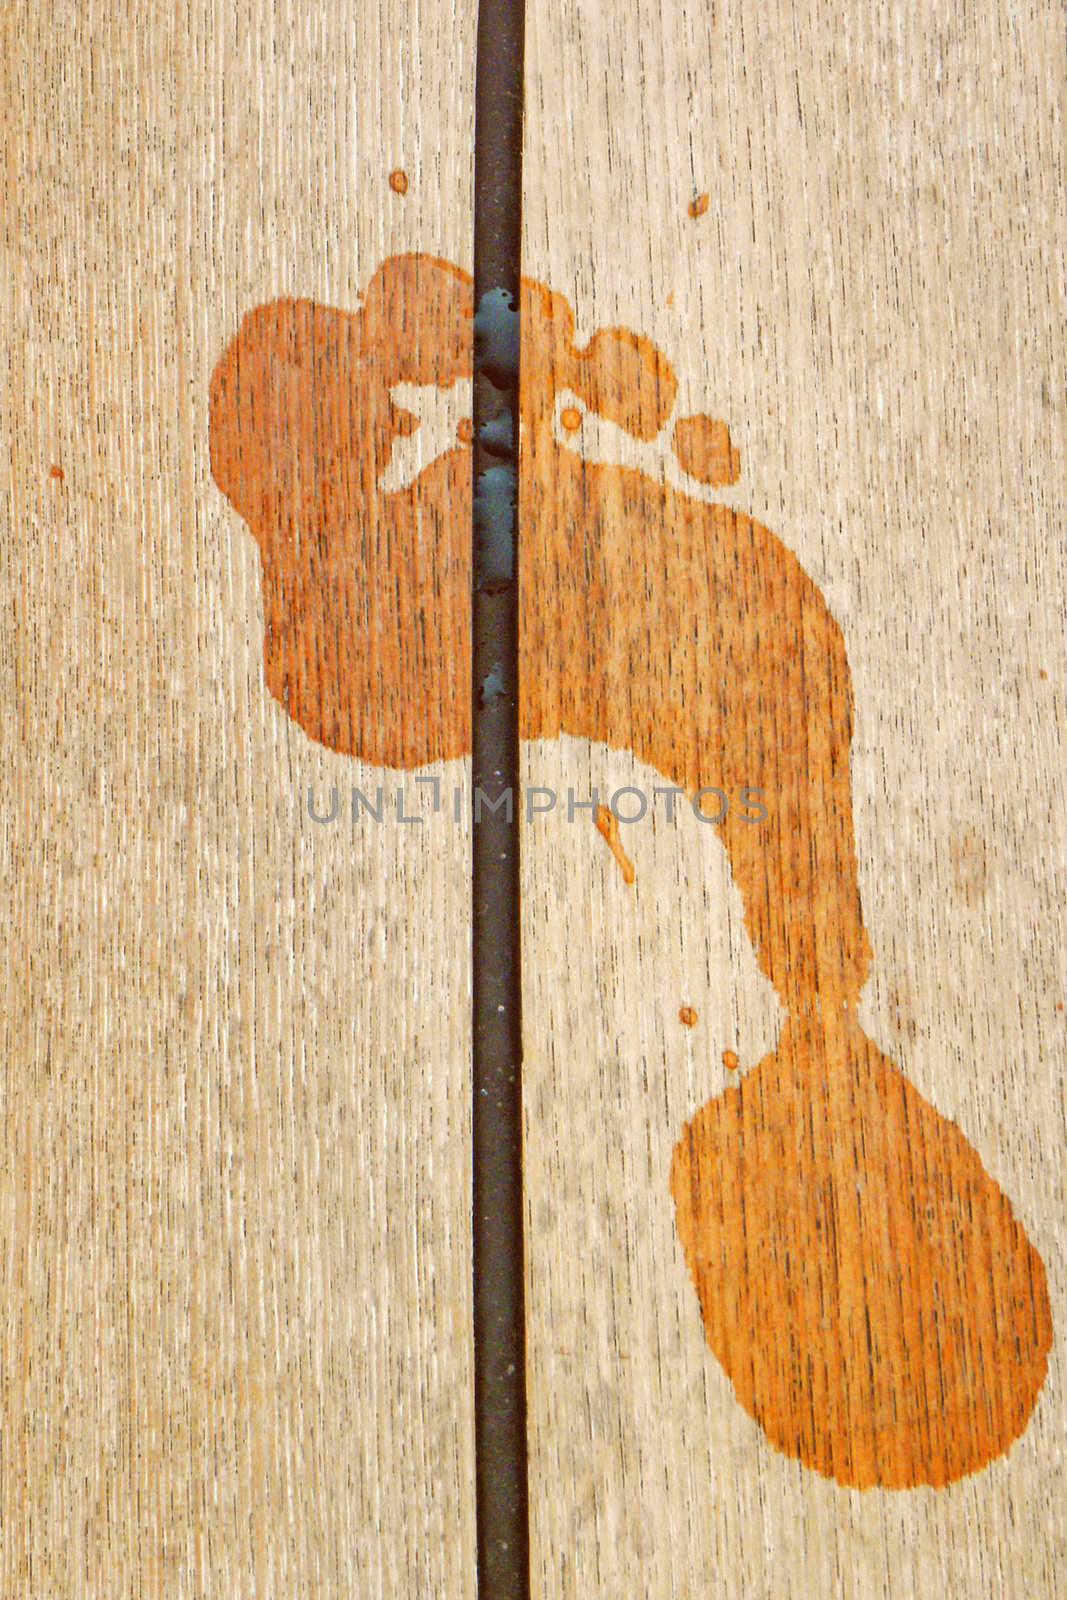 footprint on wood plank by Bestpictures